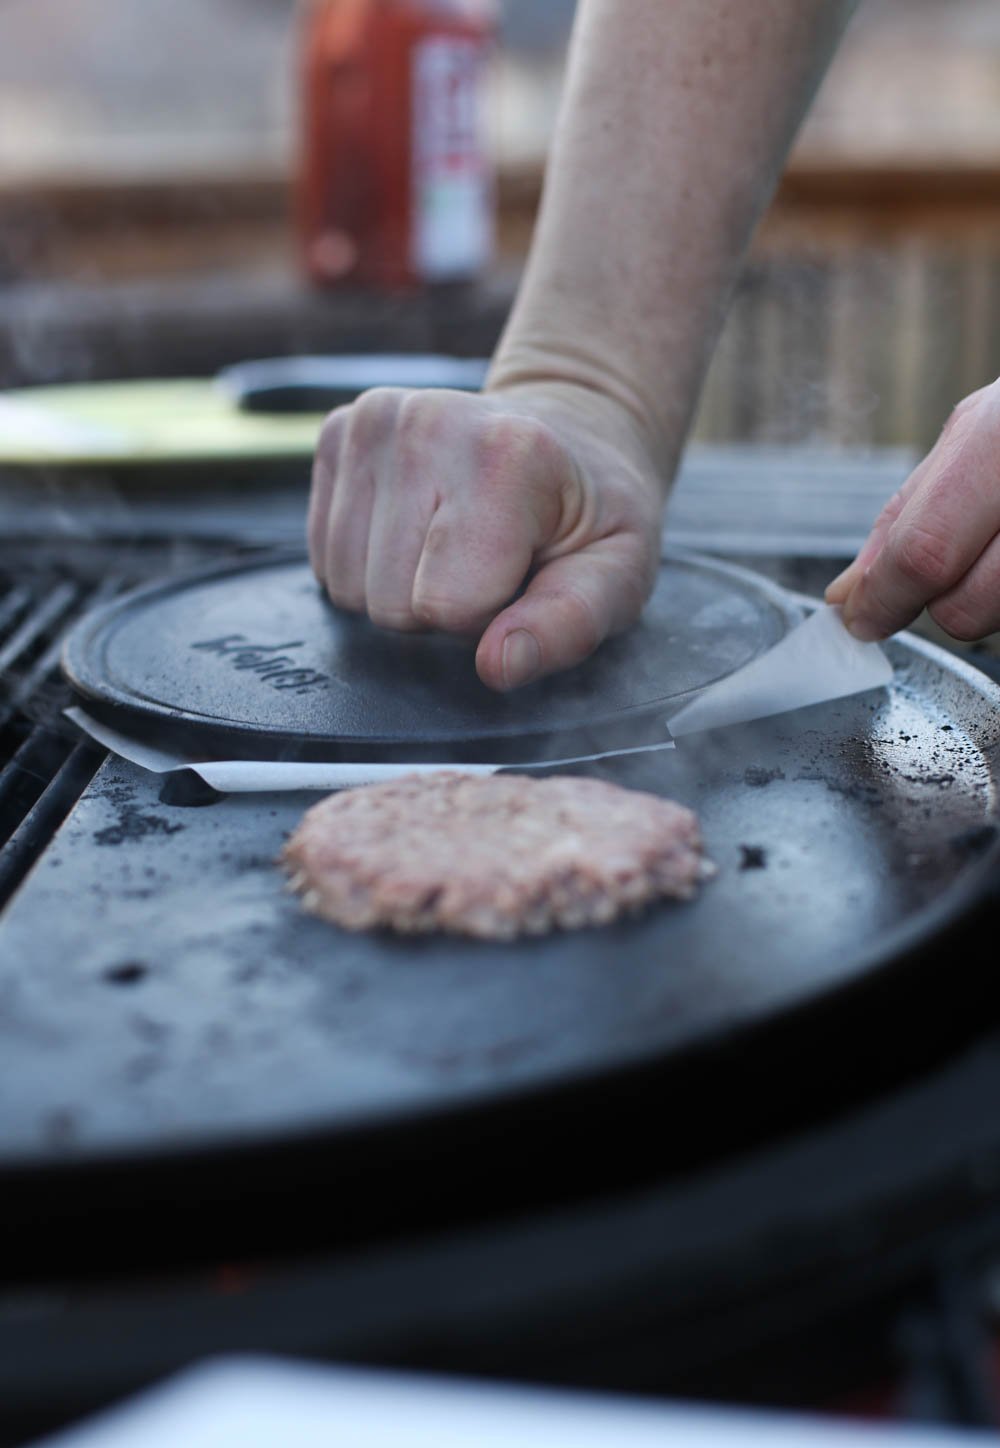 A hand pressing a burger press on top of a ground beef patty.